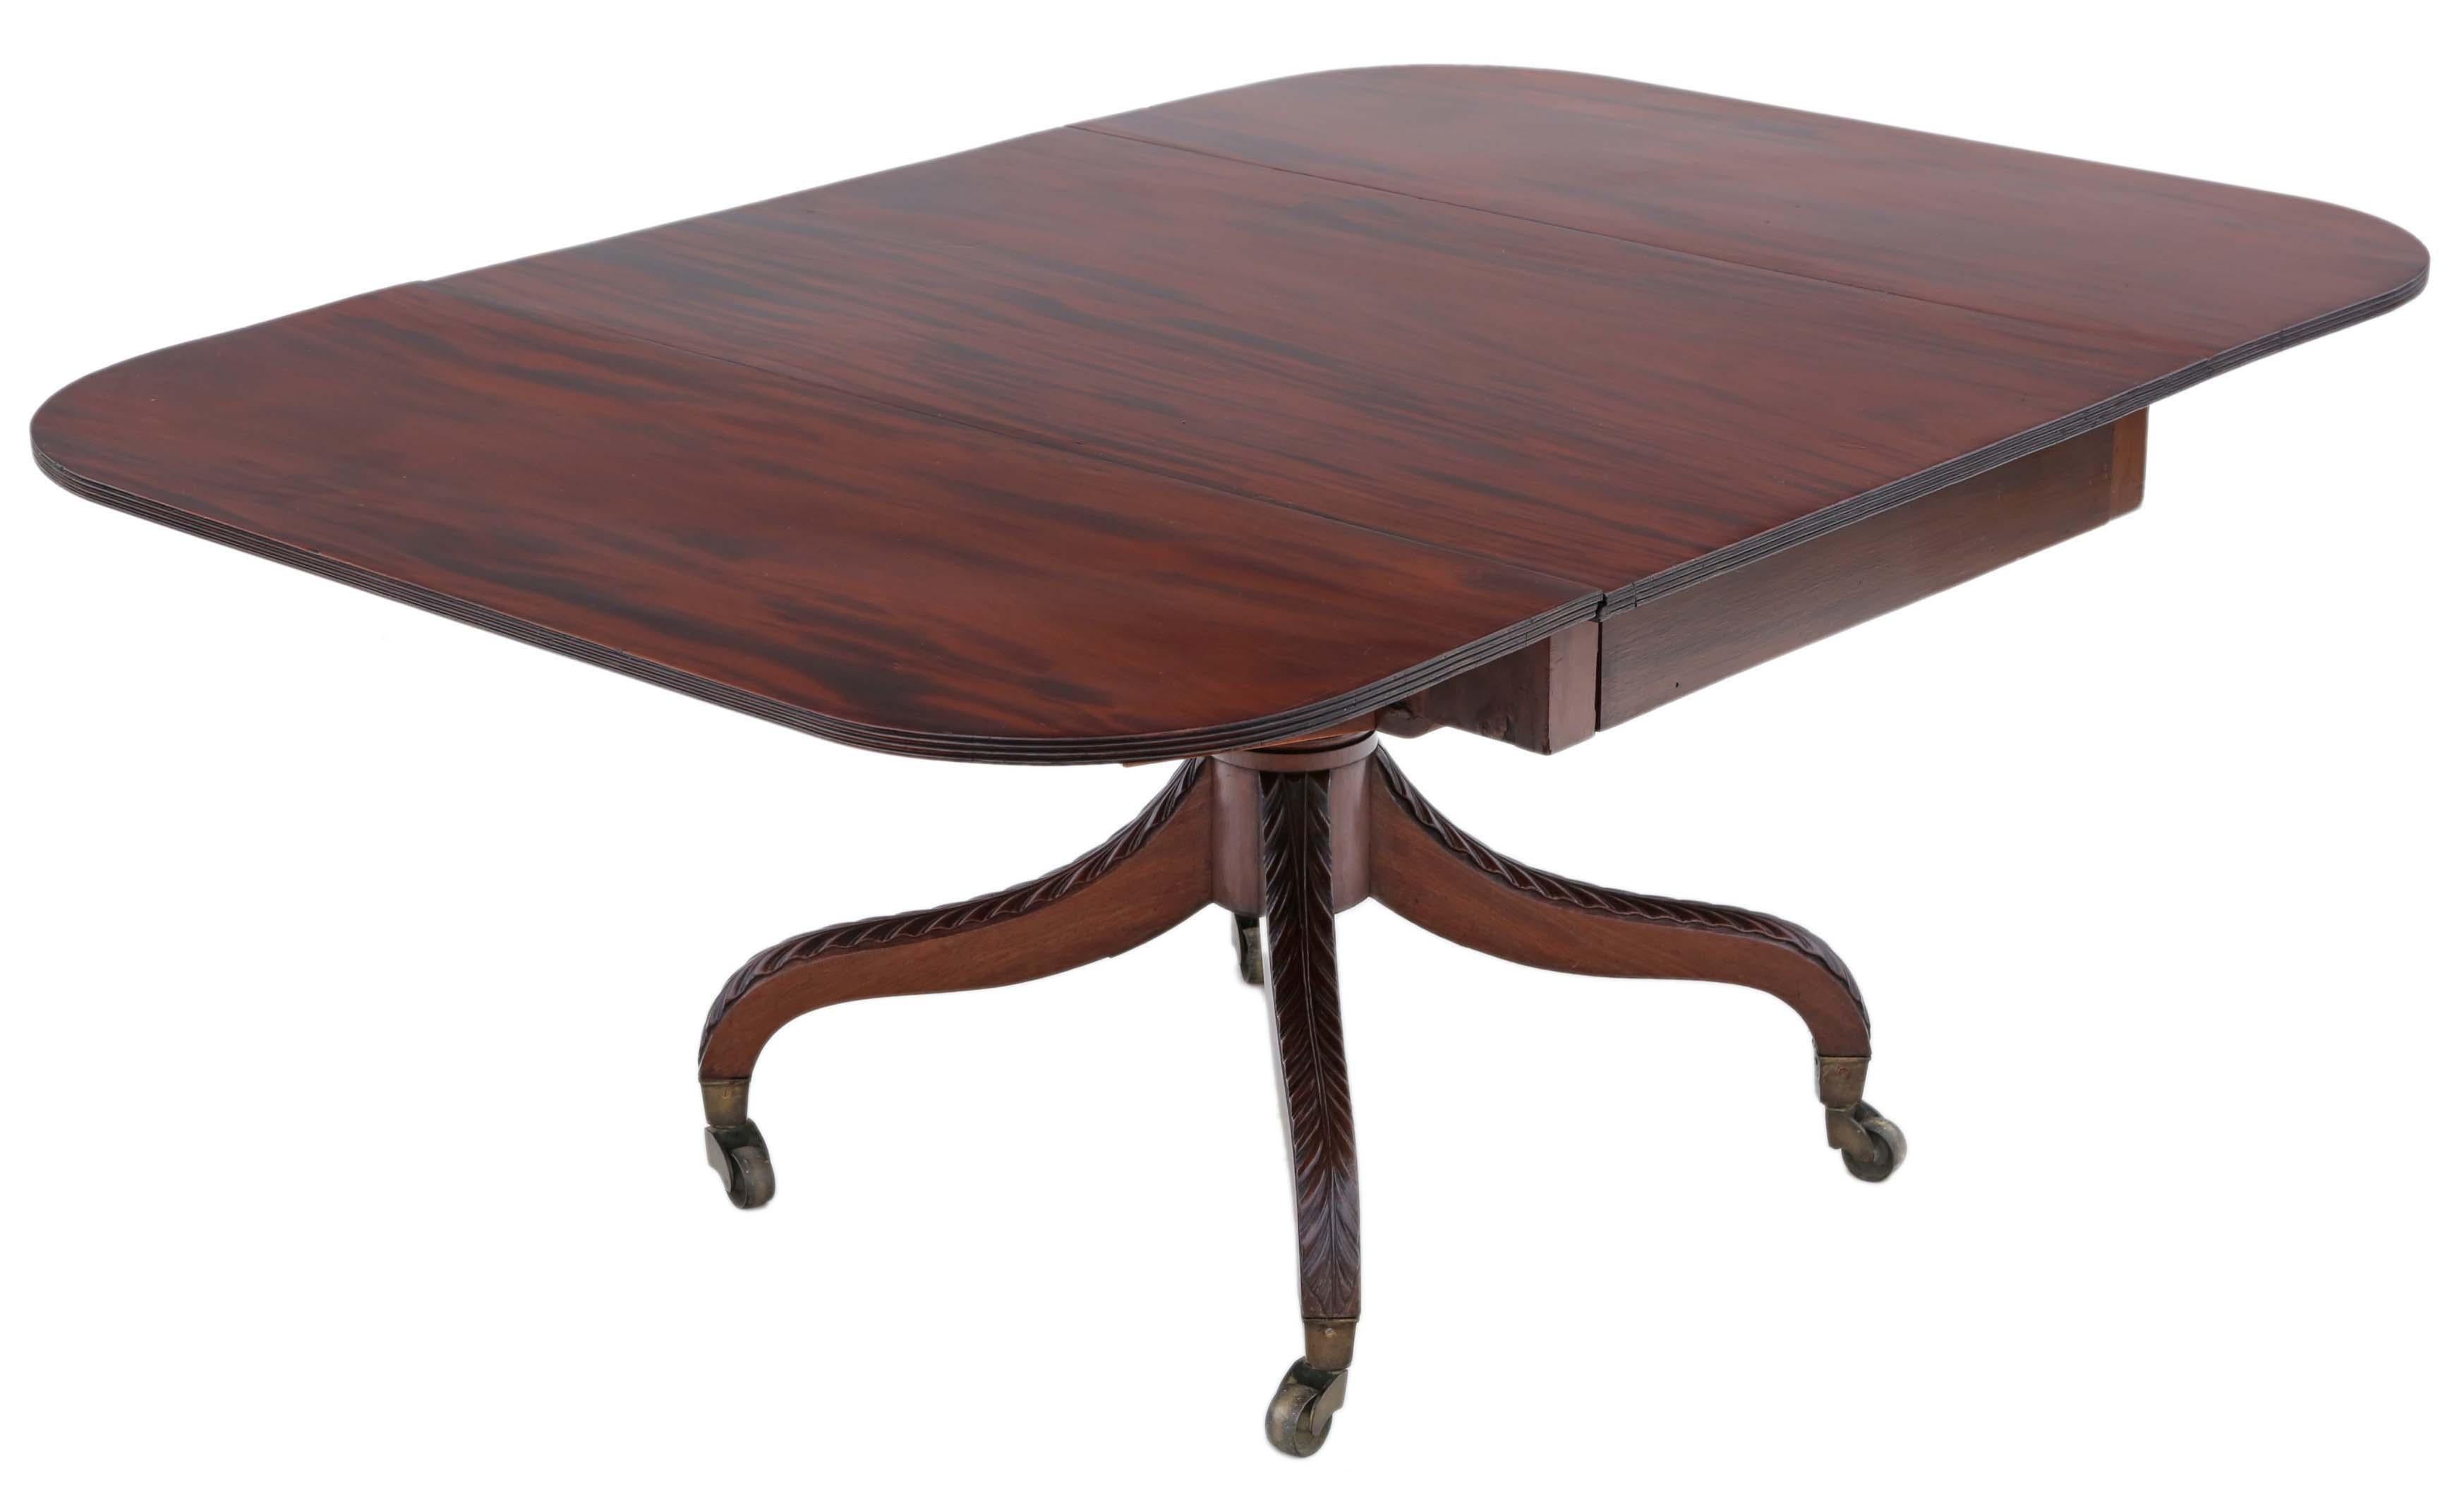 Antique Regency circa 1825 Cuban mahogany drop-leaf dining table.

This is a lovely table, that is full of age, charm and character. Lovely patina and color, with a magnificent 4-leg pedestal base and huge period brass cup castors.

Very rare